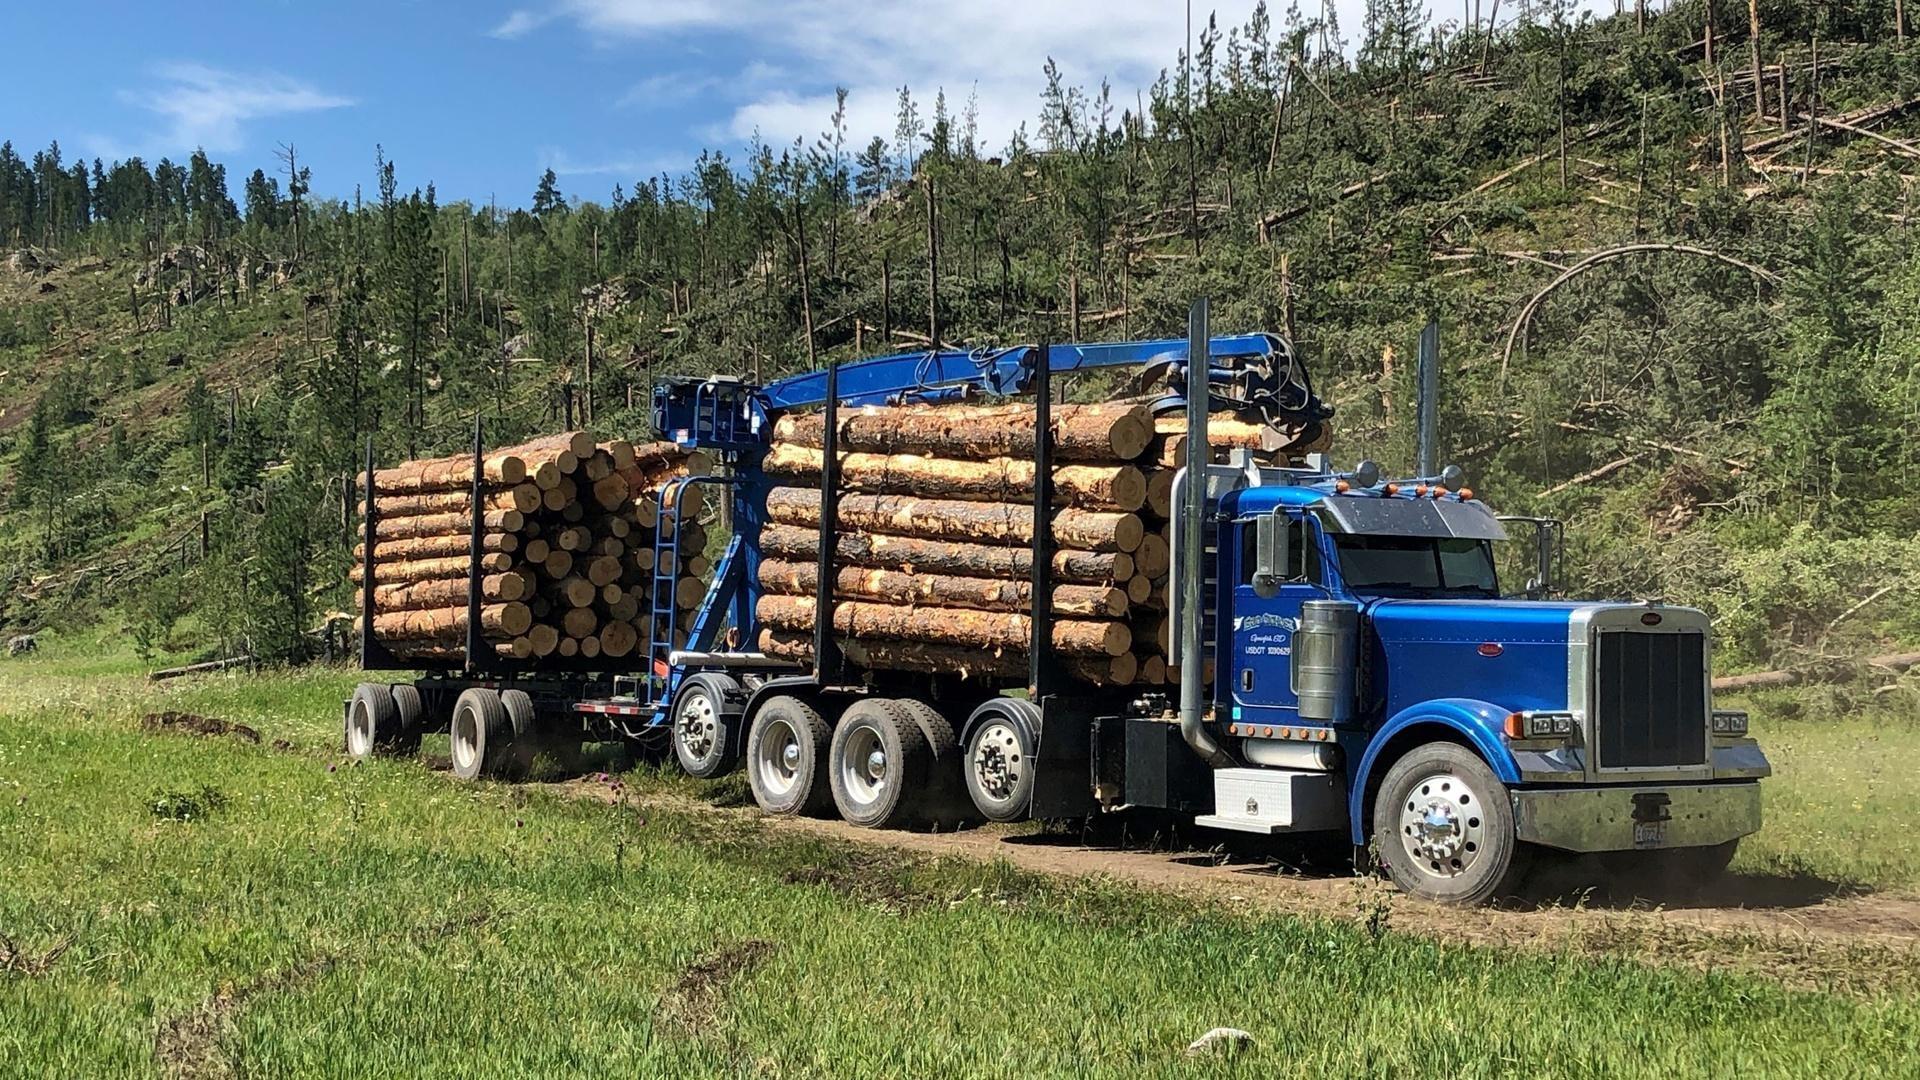 A logging truck in the Black Hills National Forest.